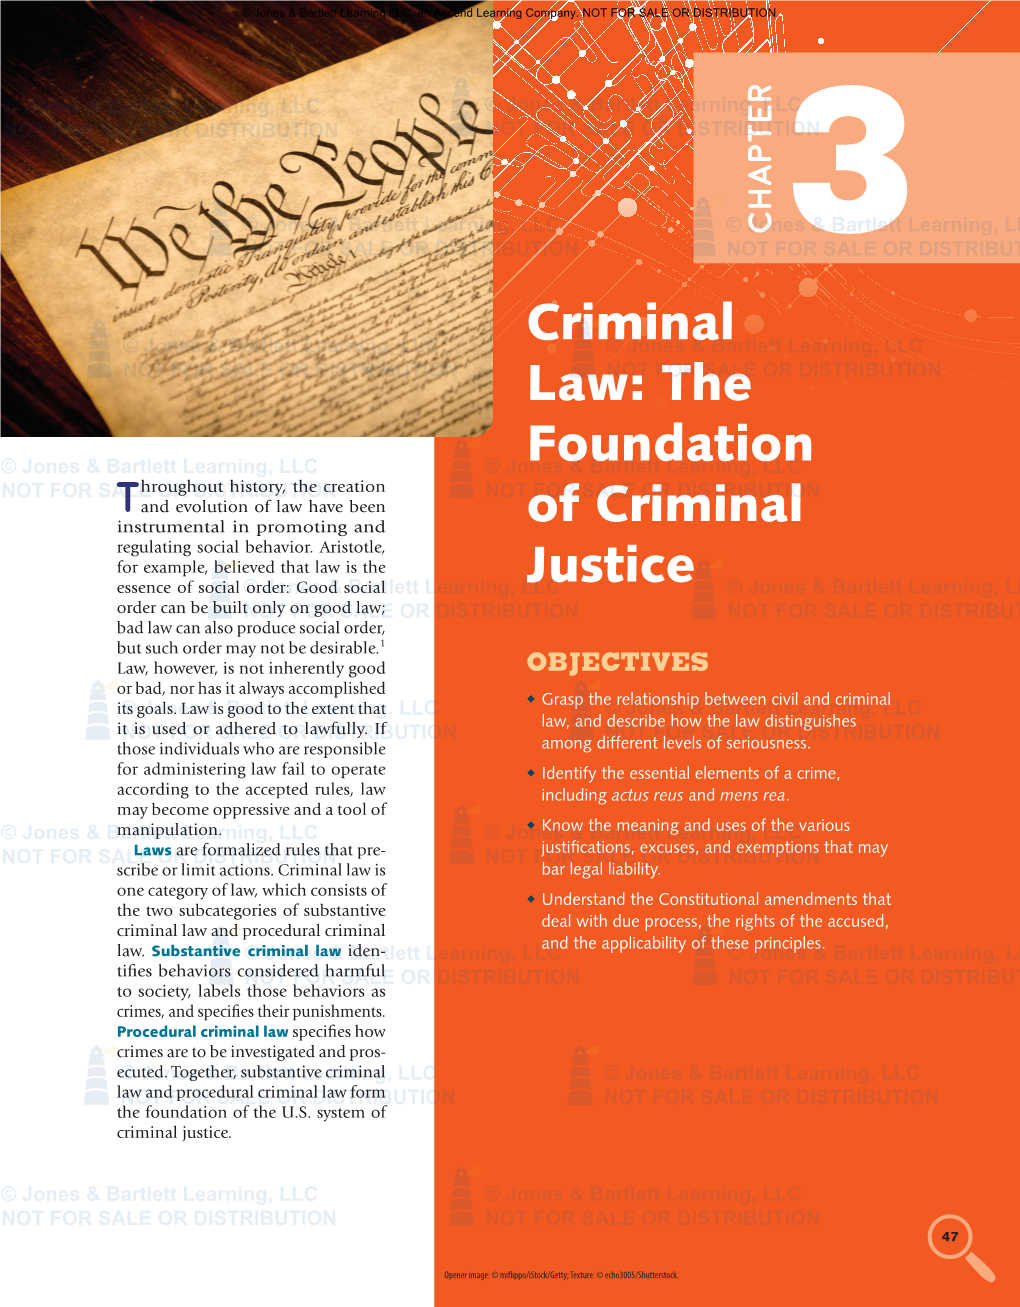 The Foundation of Criminal Justice